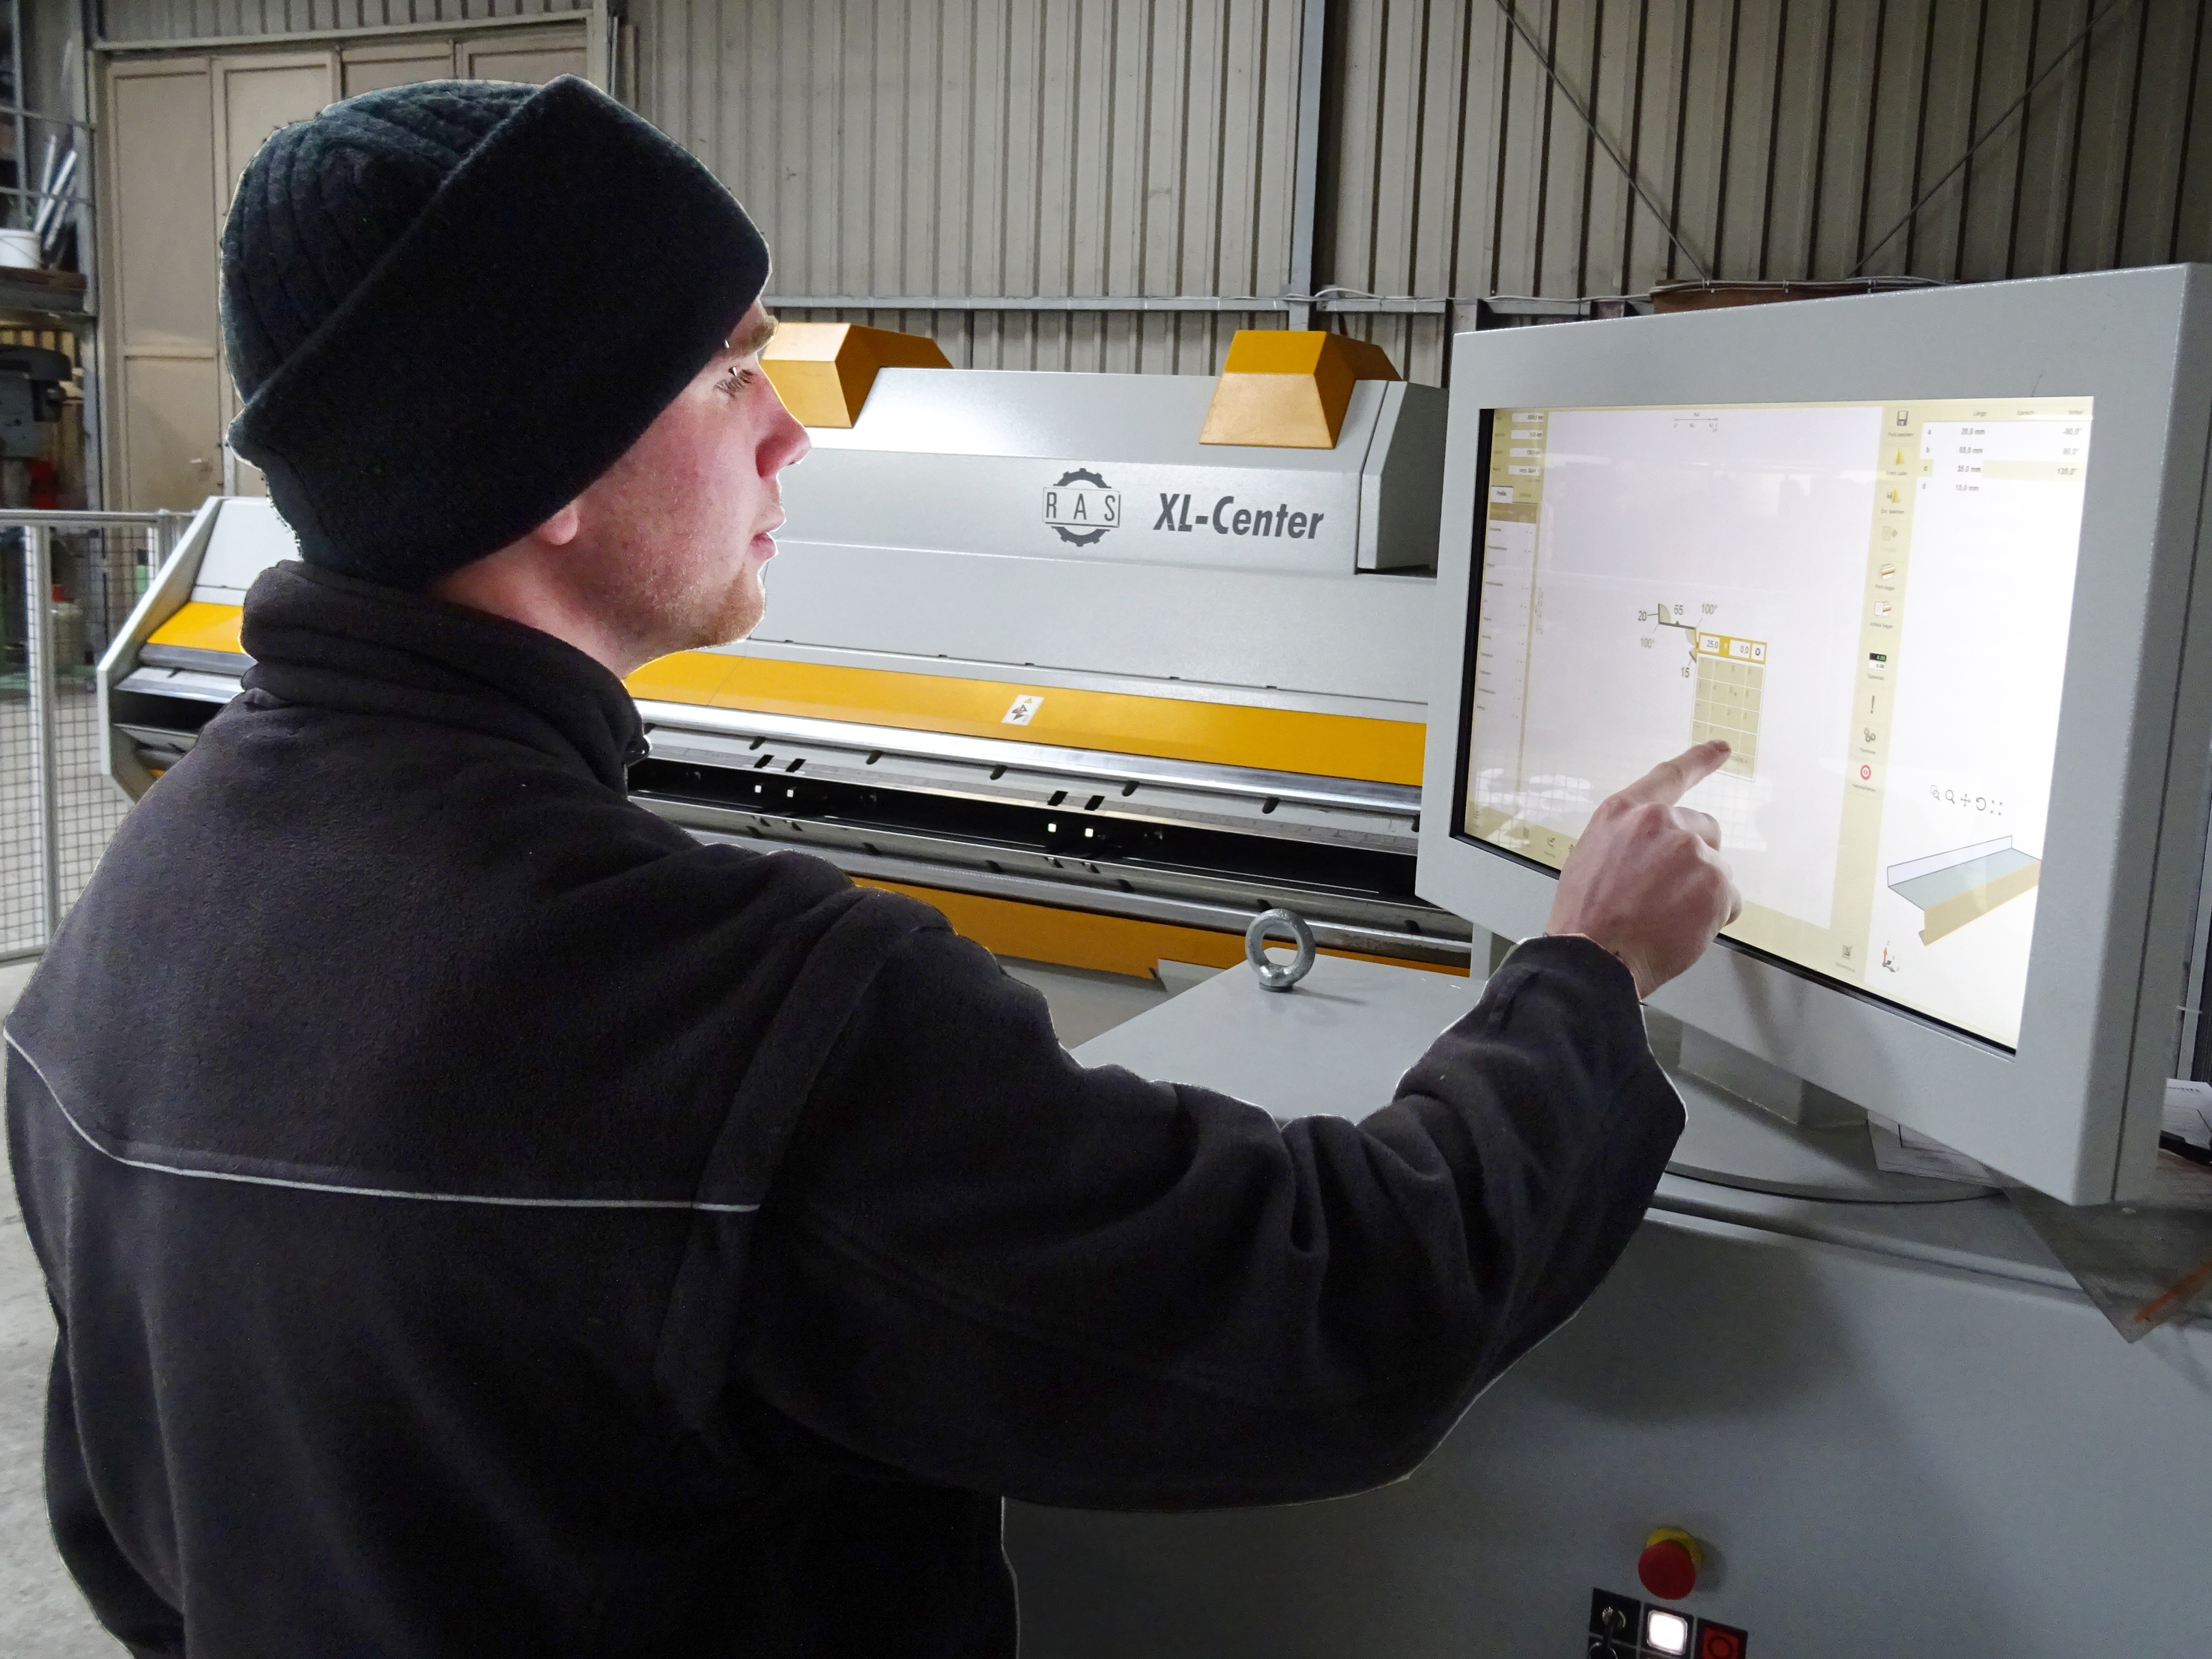 Nils Gensler drawing a metal profile with the Bendex software